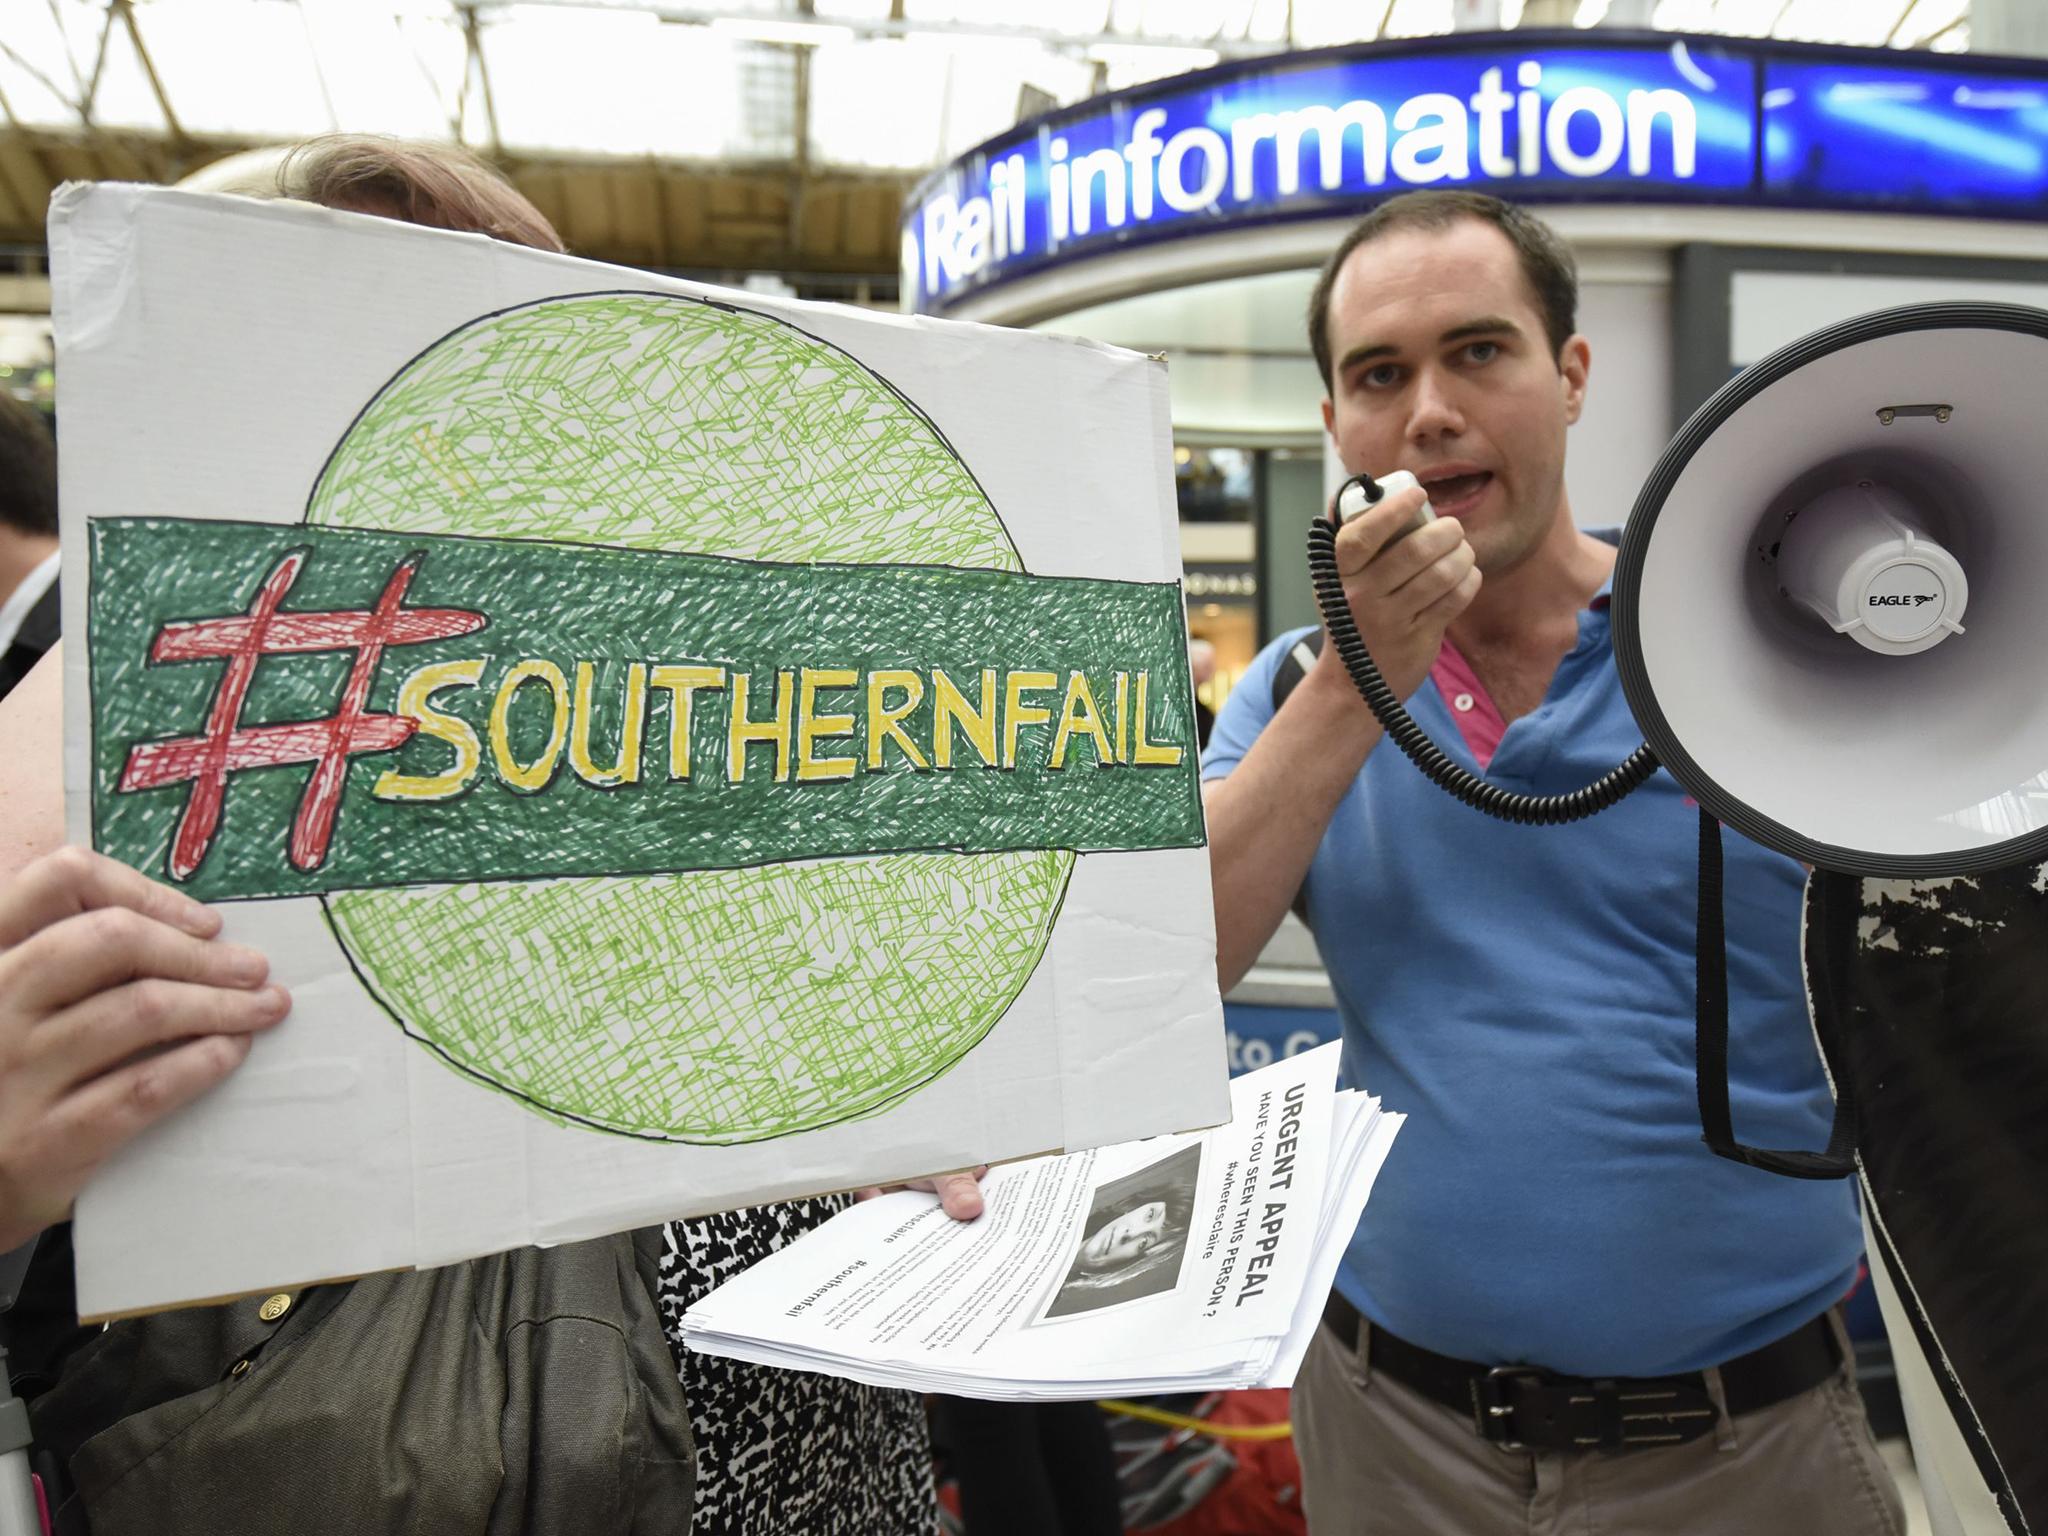 Passengers stage a 'fare strike' and protest at Victoria Station in central London in response to Southern Railway's owner, Govia Thameslink Railway, cutting 341 trains a day, 15% of services, to deal with industrial action and staff sickness